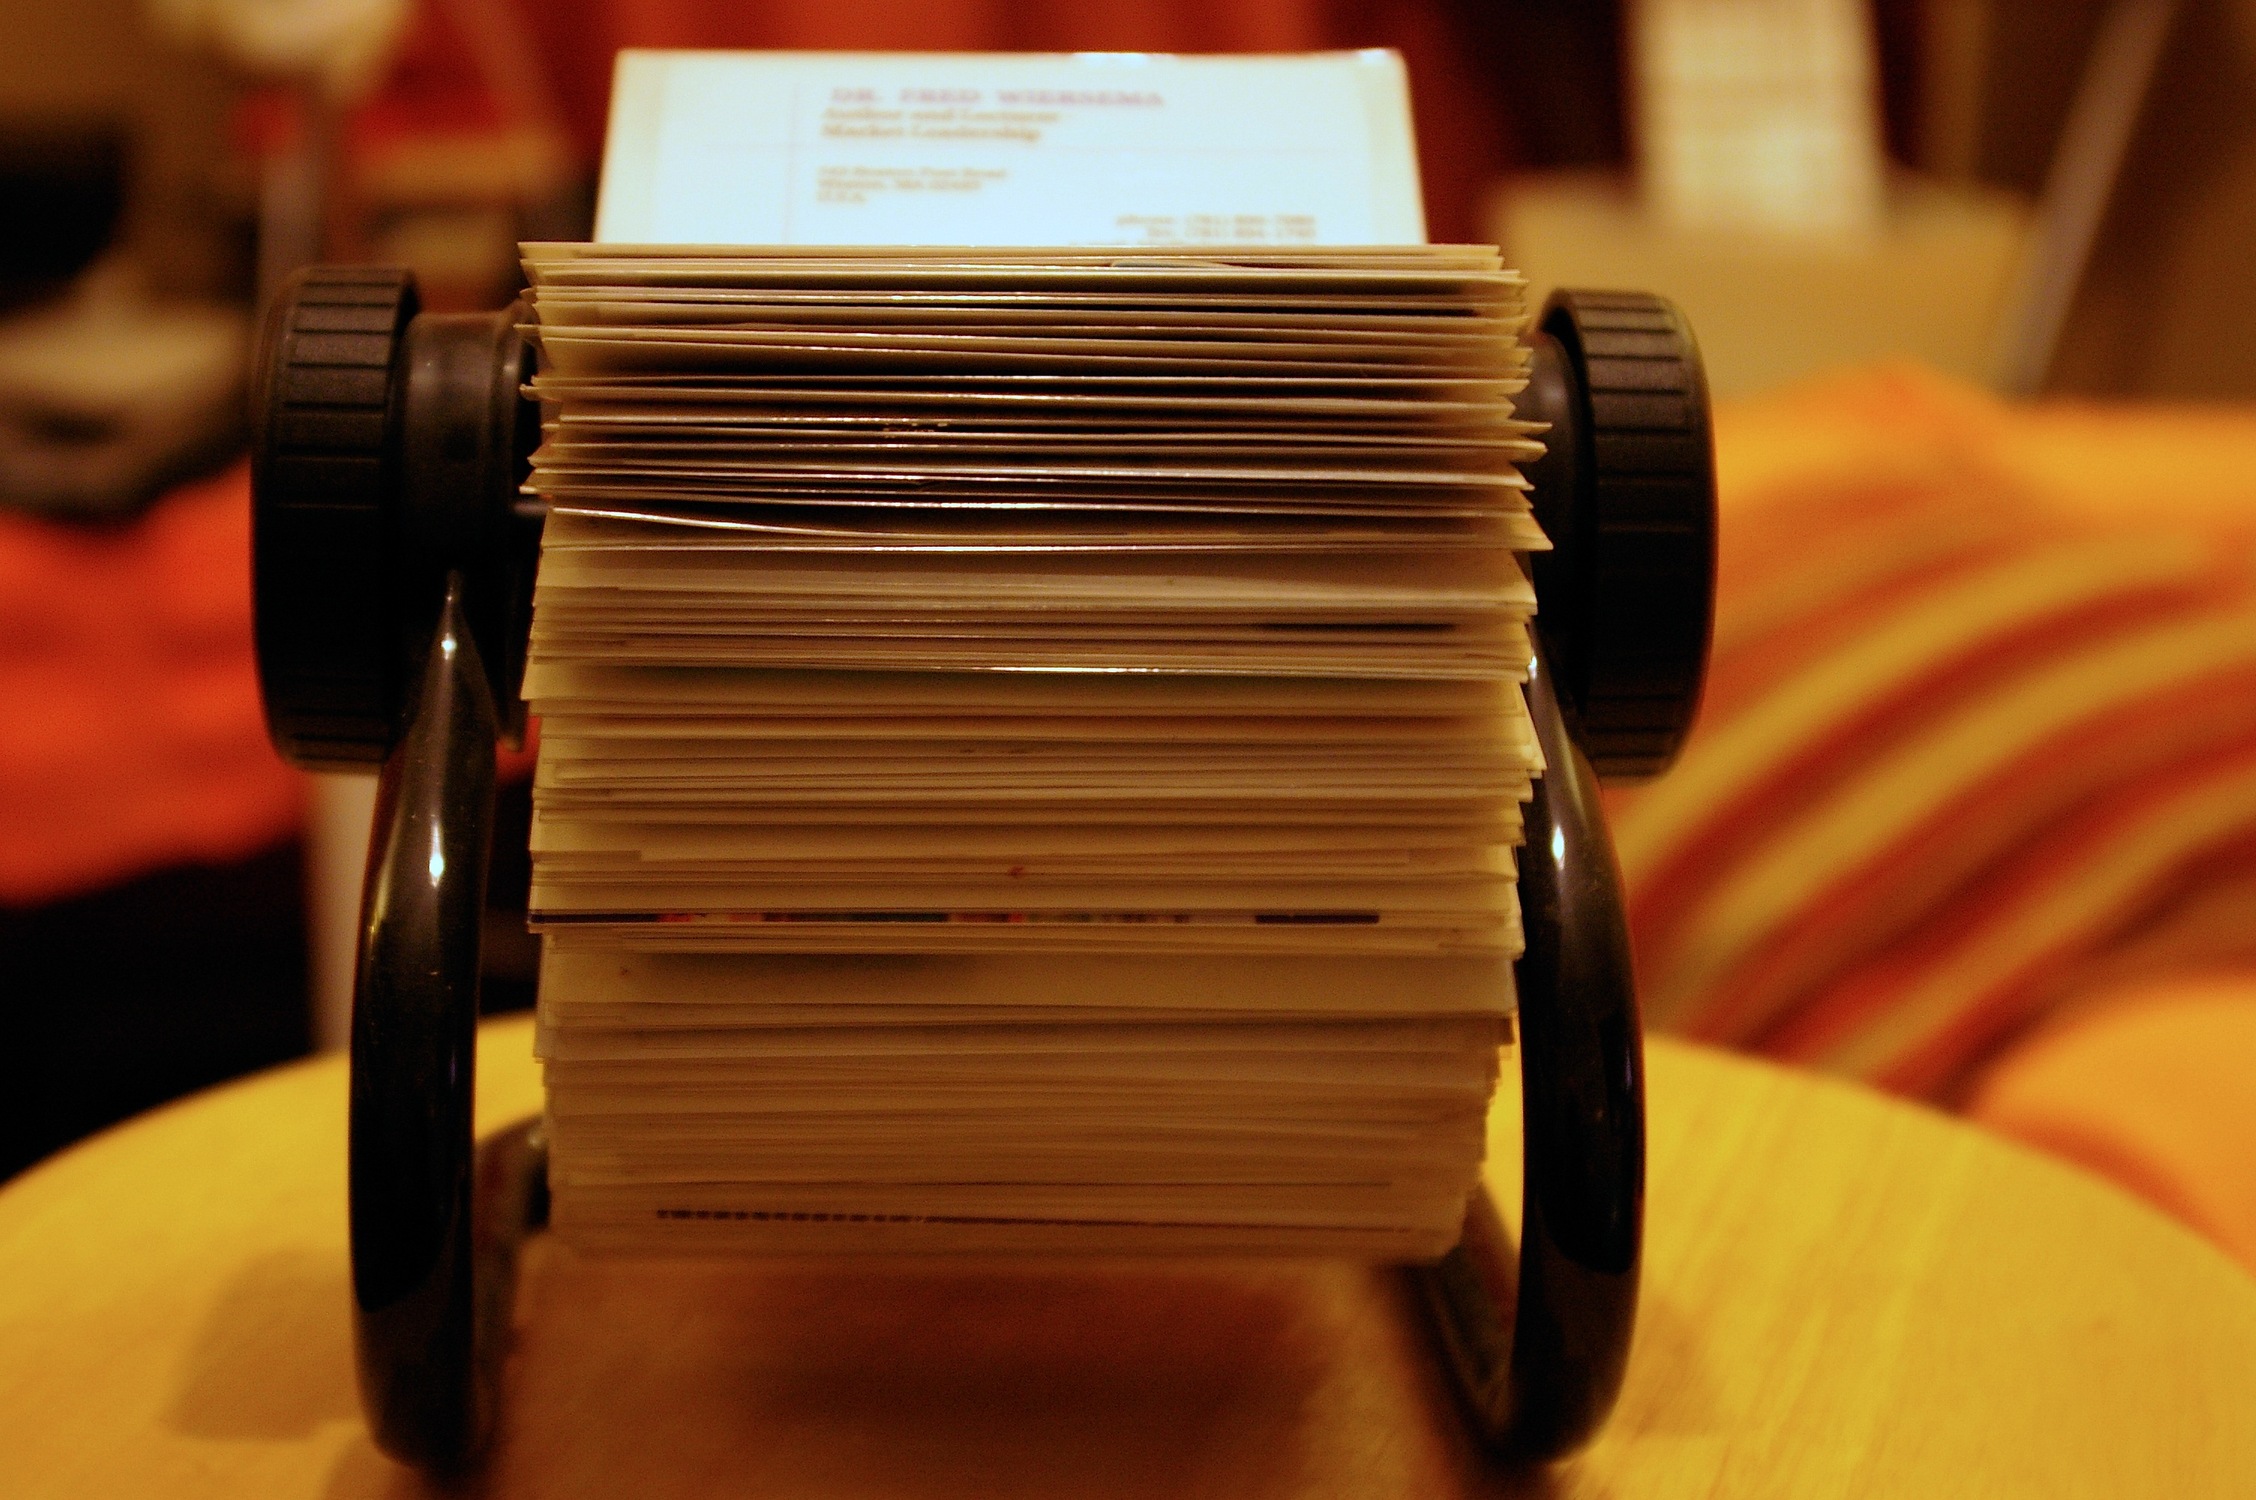 Photo of a Rolodex against a blurred background